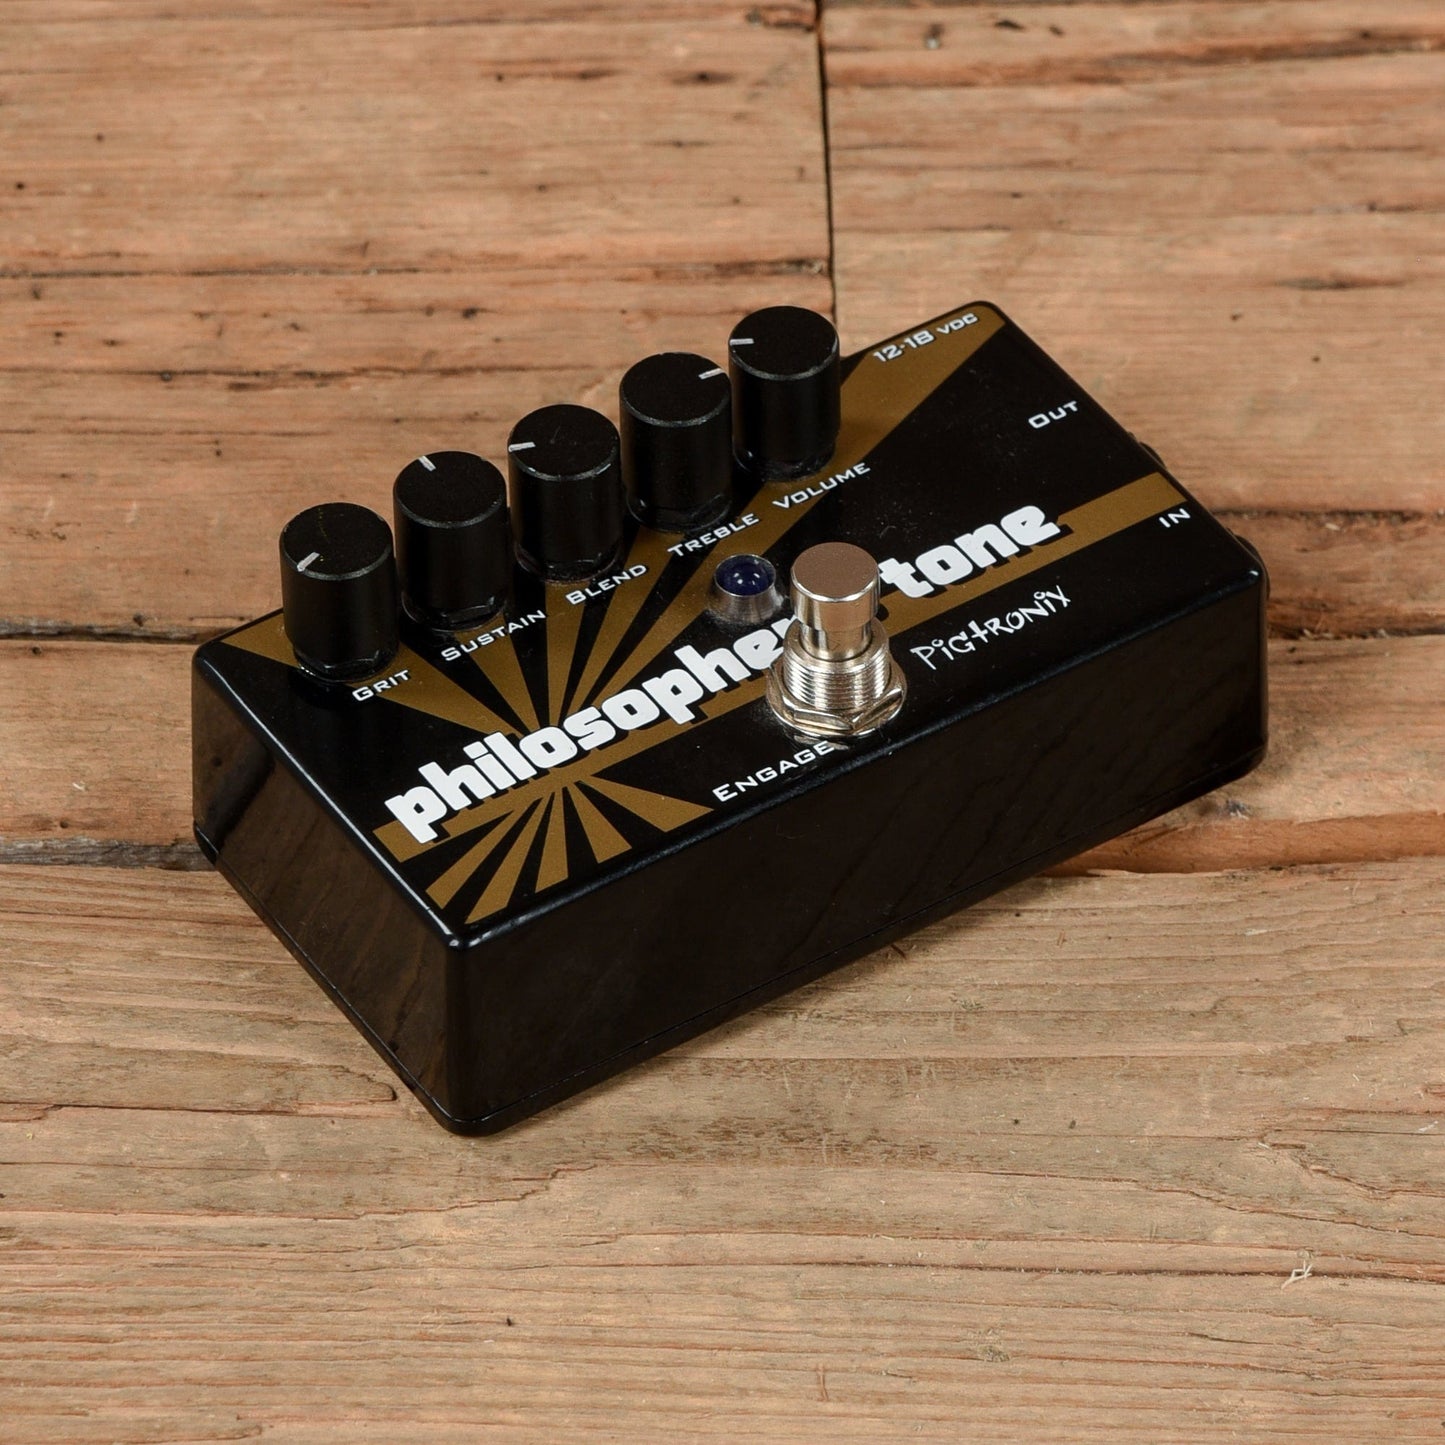 Pigtronix Philosopher's Tone Effects and Pedals / Compression and Sustain